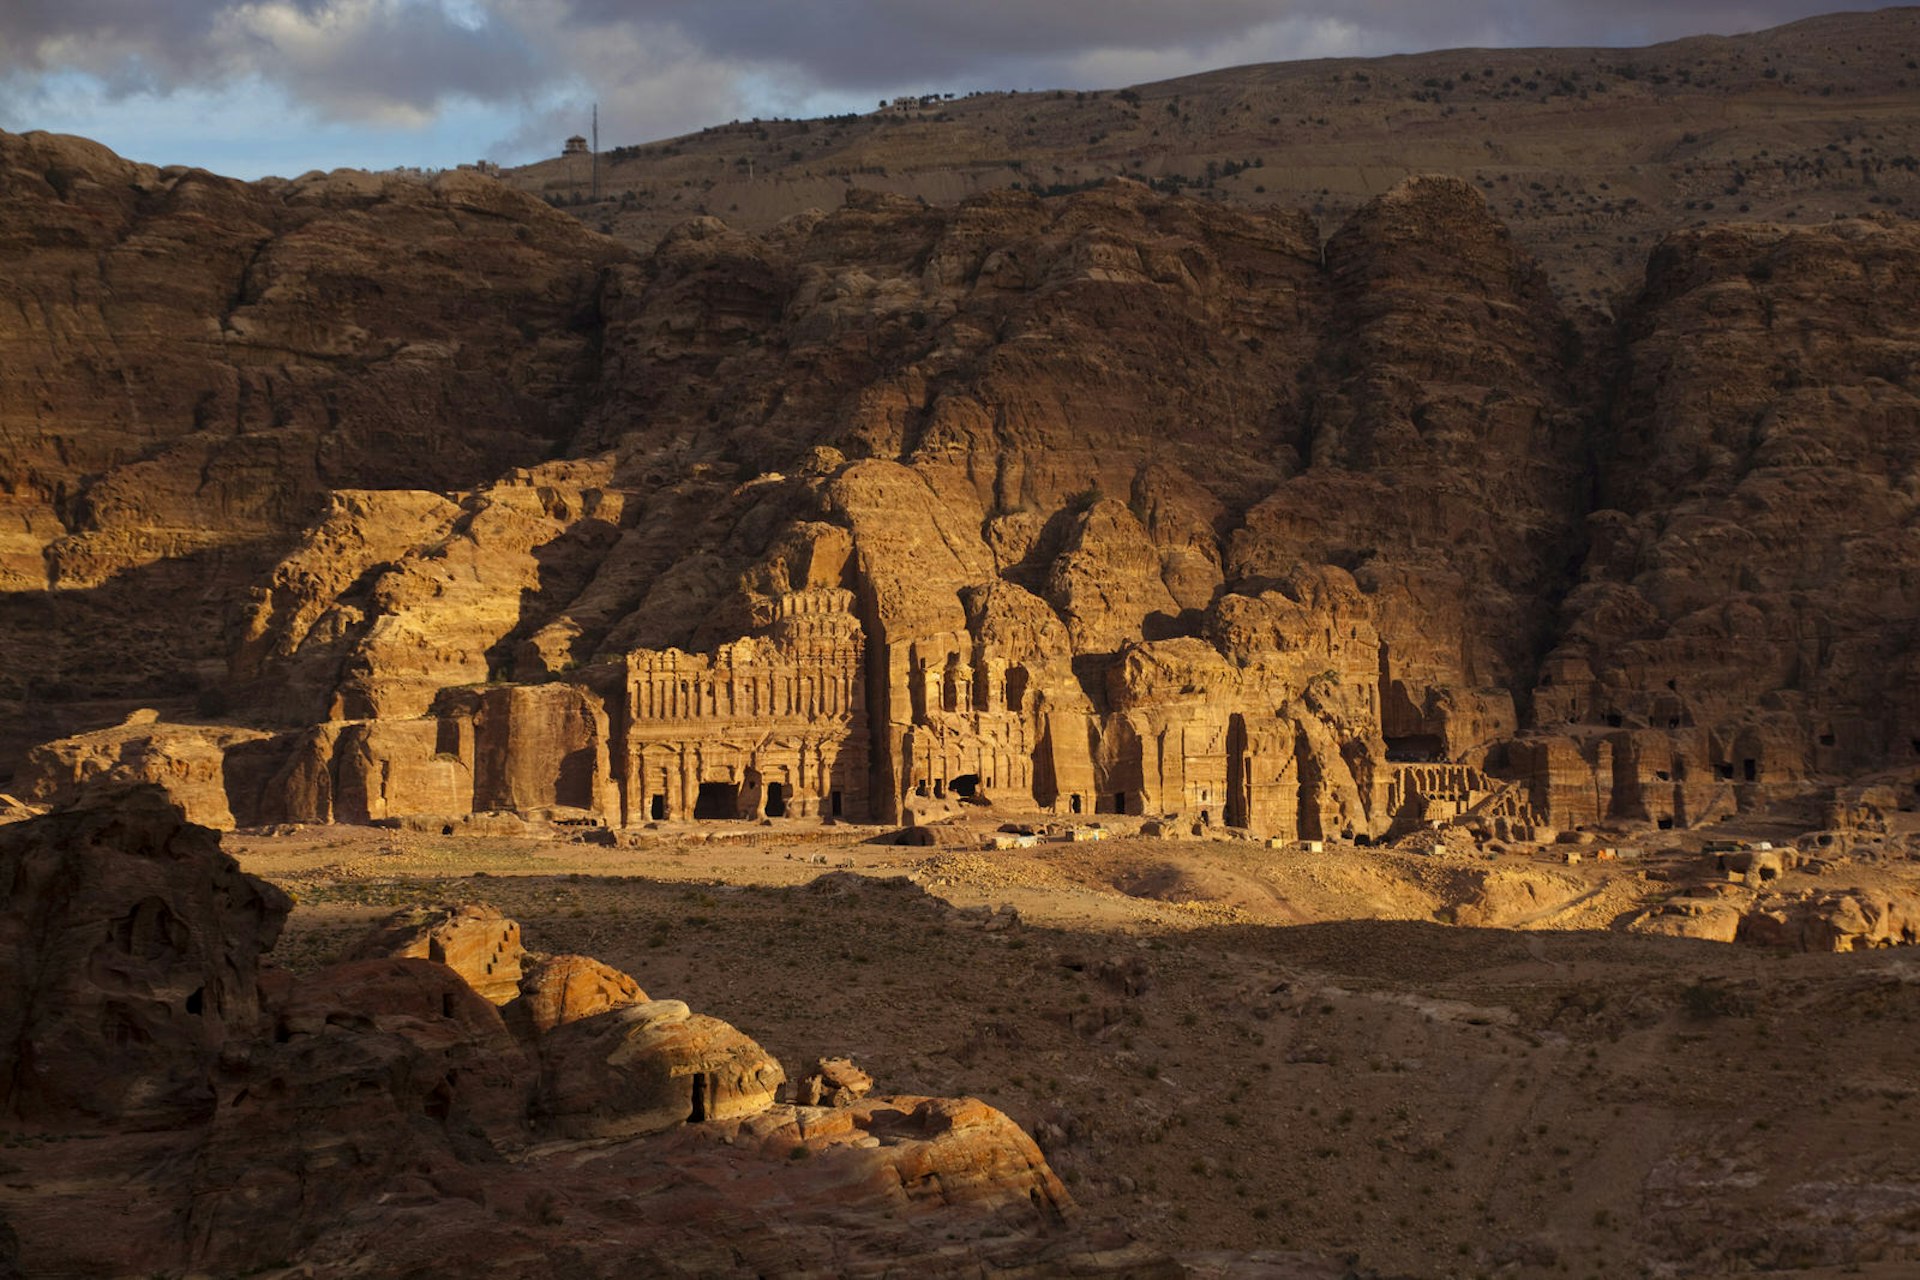 Sunset over the Royal Tombs in Petra, Jordan. Image by Ethan Welty / Getty Images